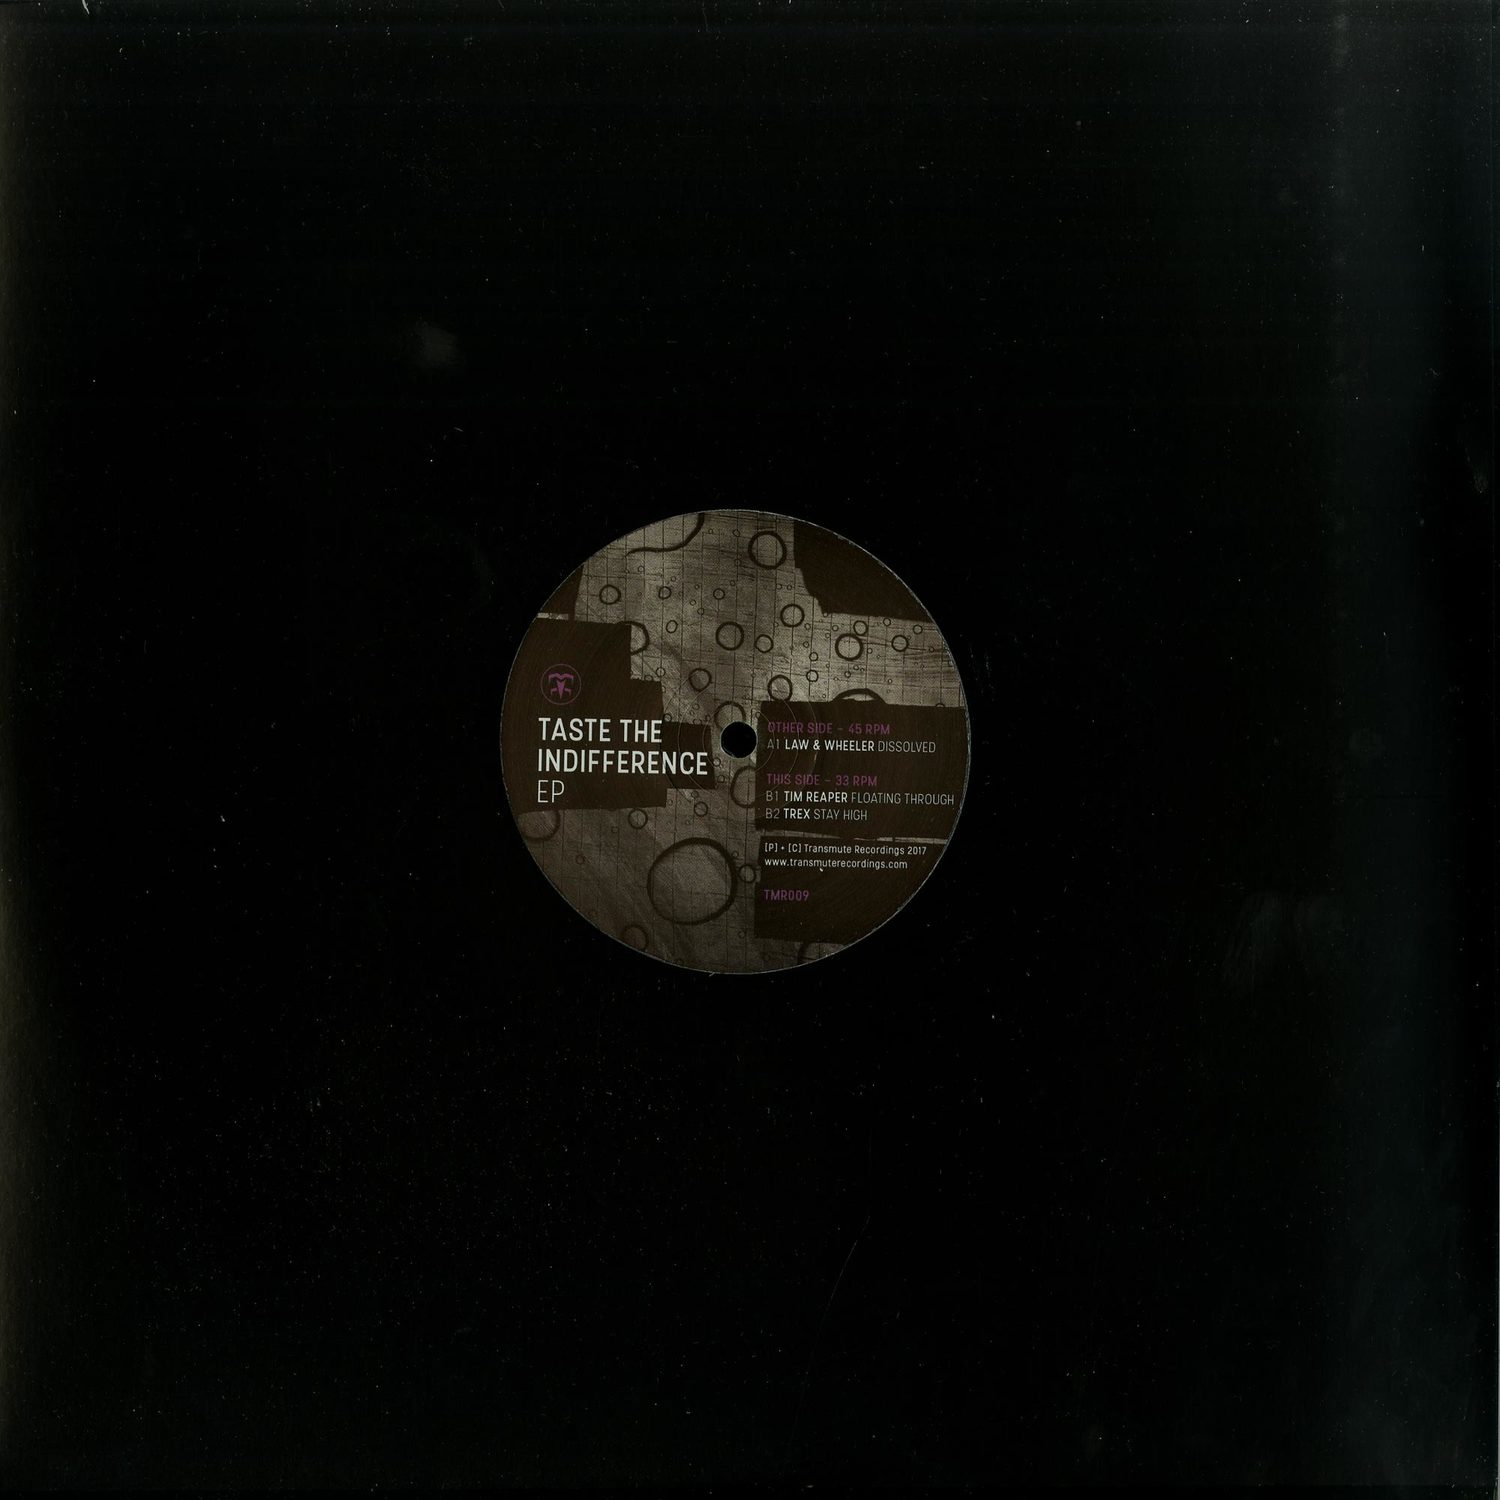 Law & Wheeler / Tim Reaper / Trex - TASTE THE INDIFFERENCE EP